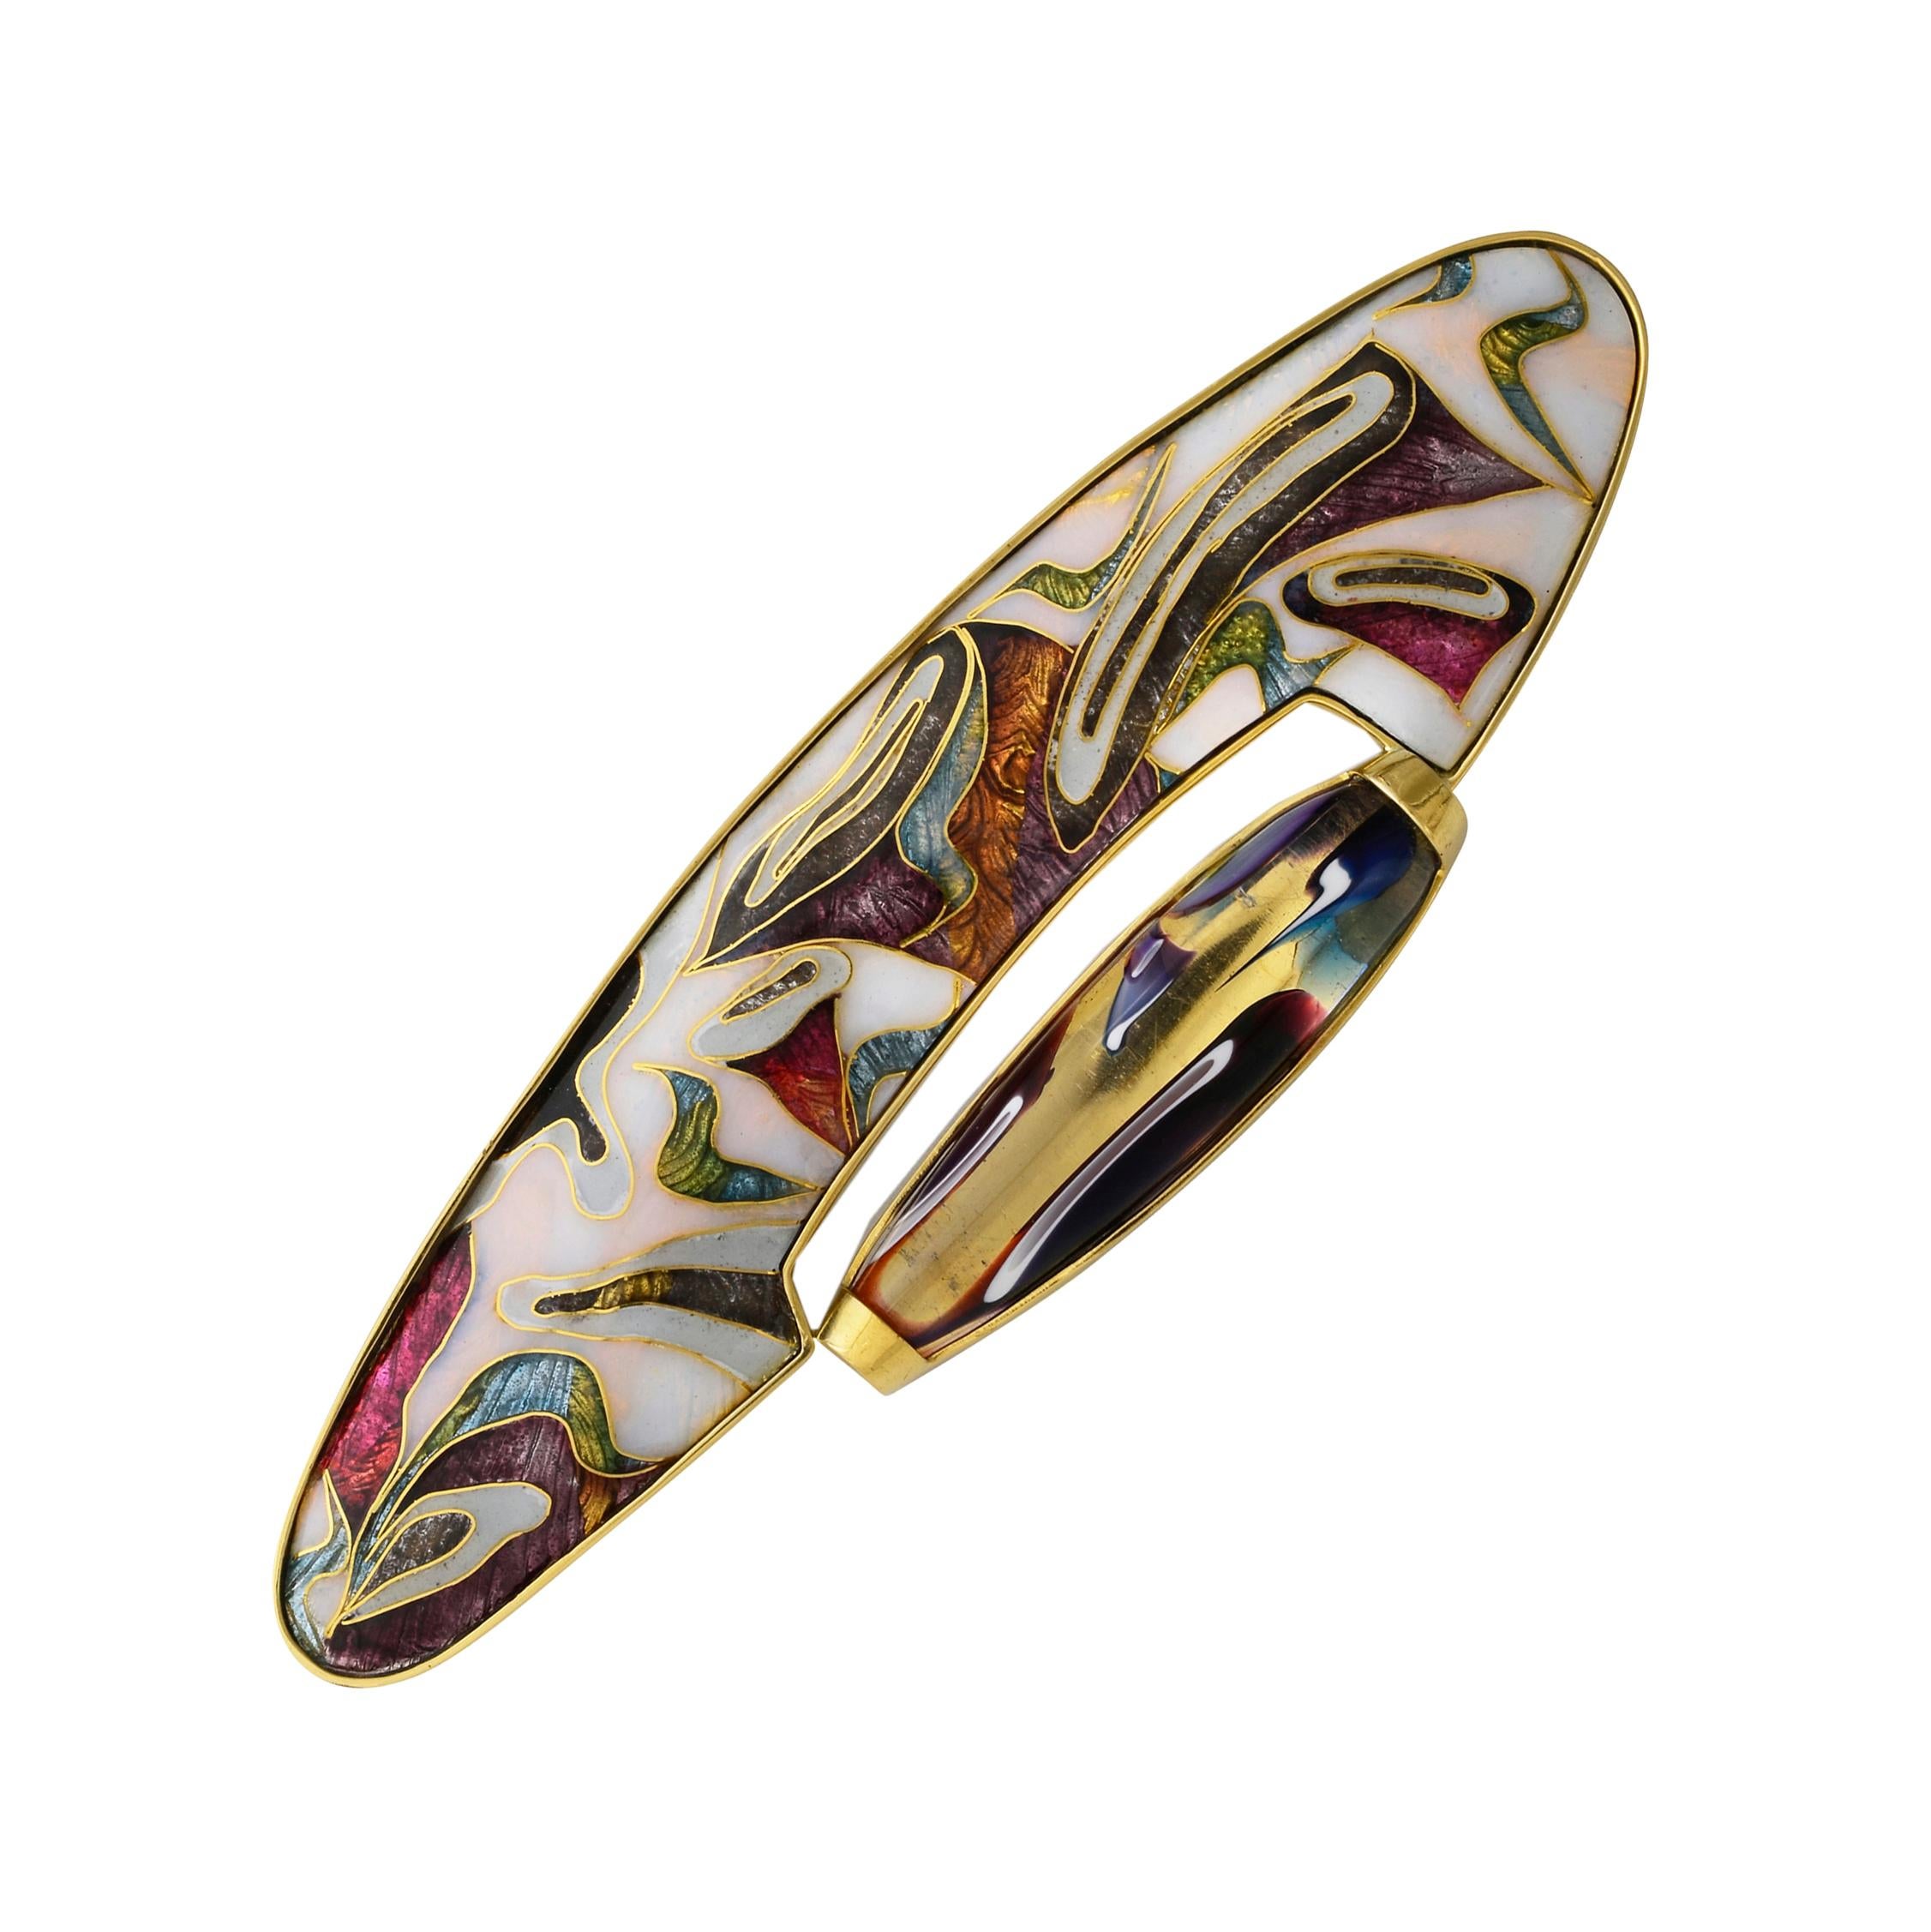 A very beautiful and unusual cloisonné brooch/pendant is a one-off piece of hand made art jewellery.
It is set in a bezel of 22Karat gold with a  sterling silver back plate. As part of the design, a superb piece of dichroic glass embellishes the